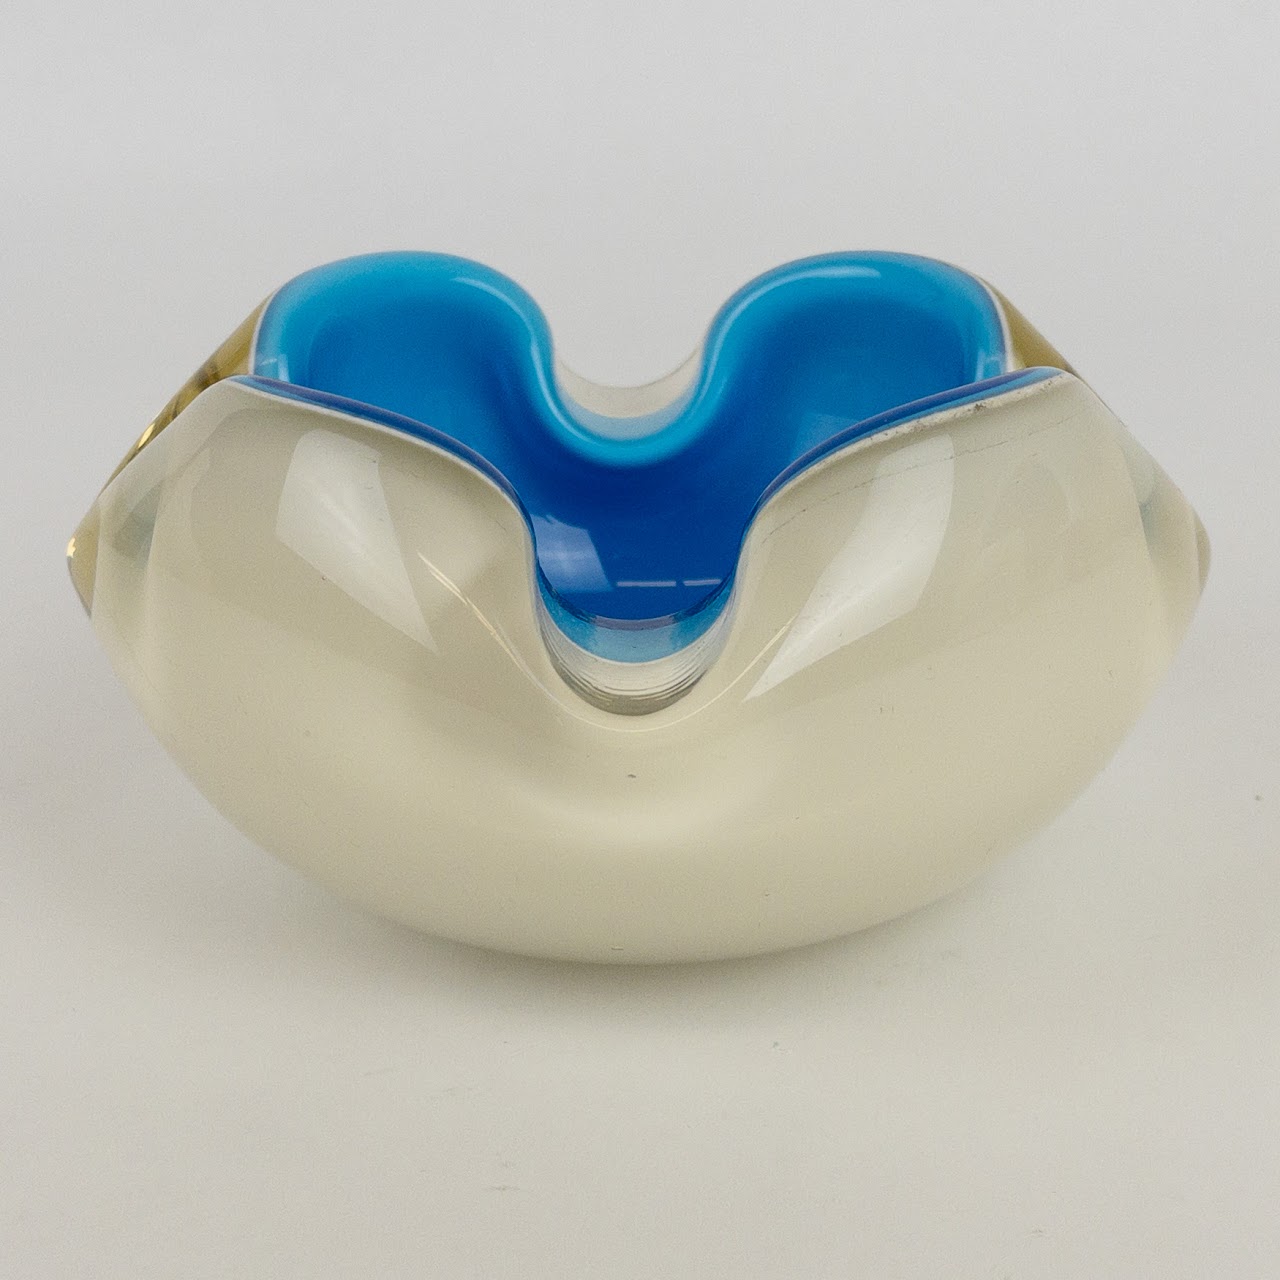 Two-Toned Art Glass Ash Tray